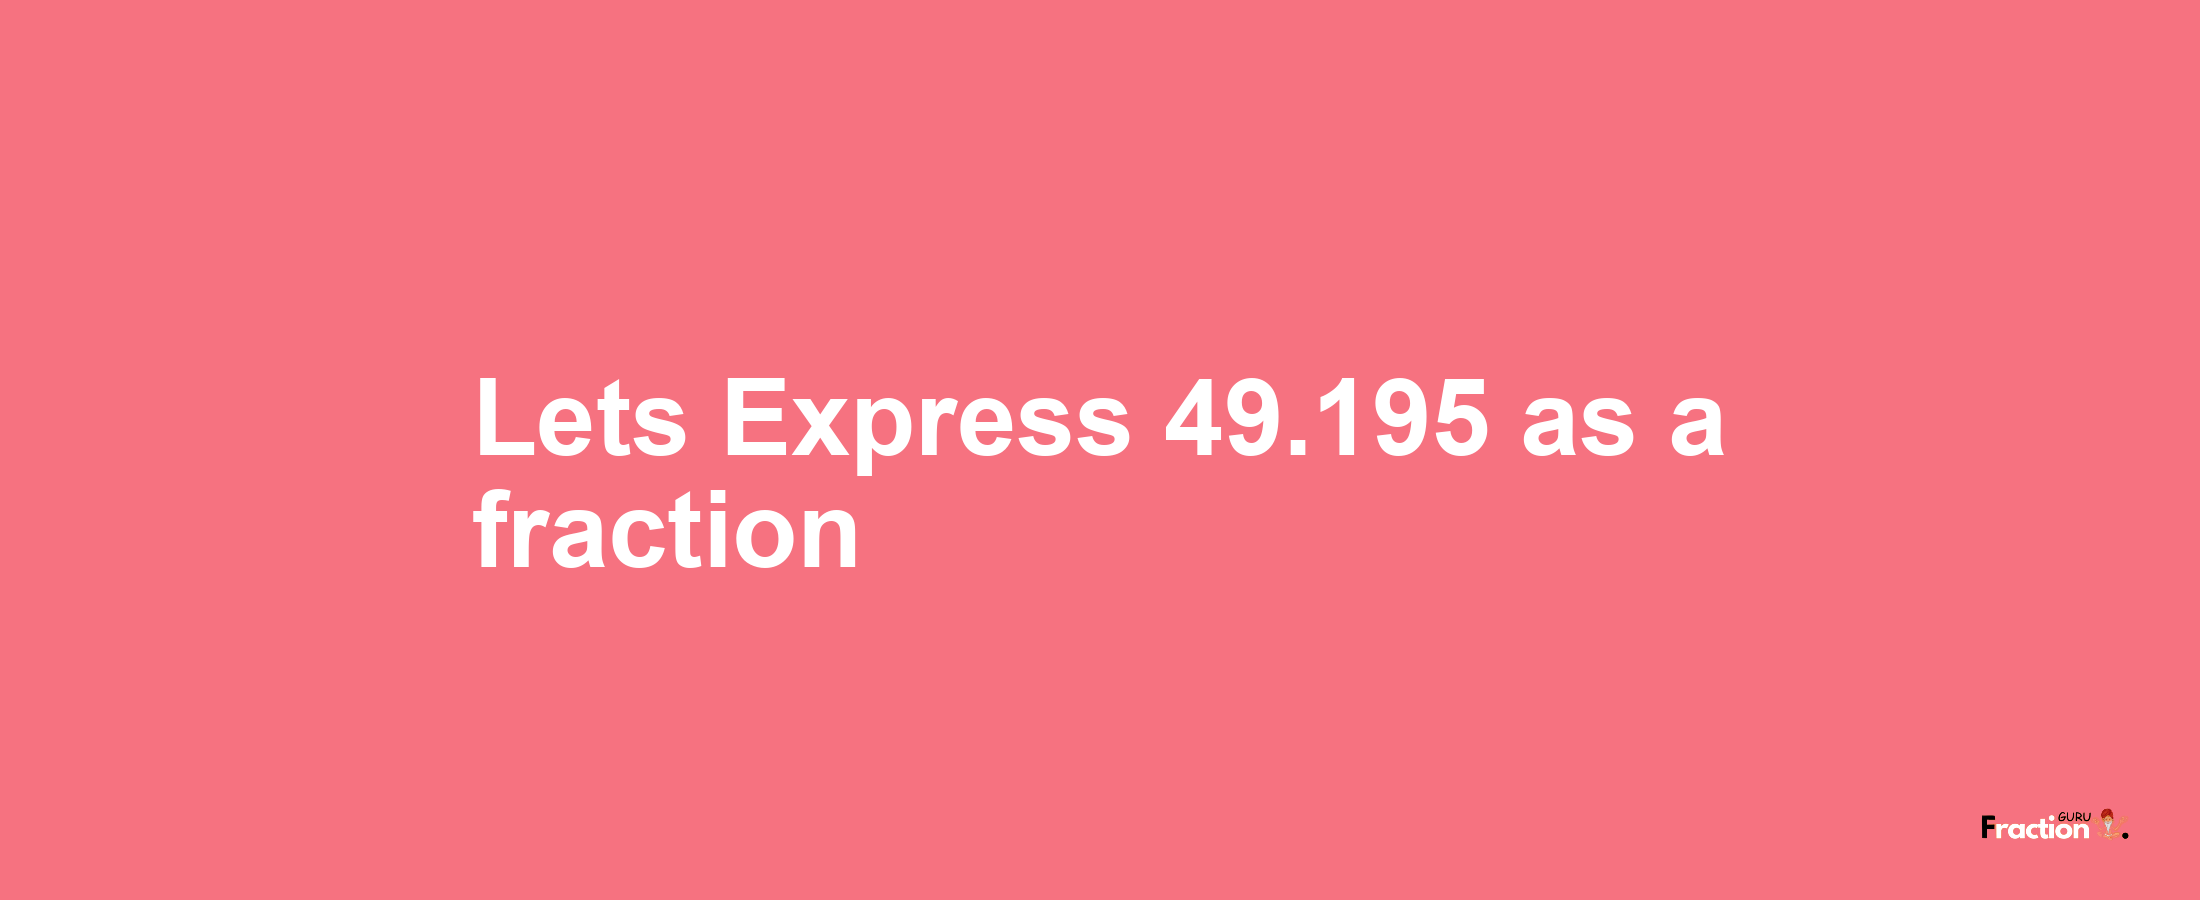 Lets Express 49.195 as afraction